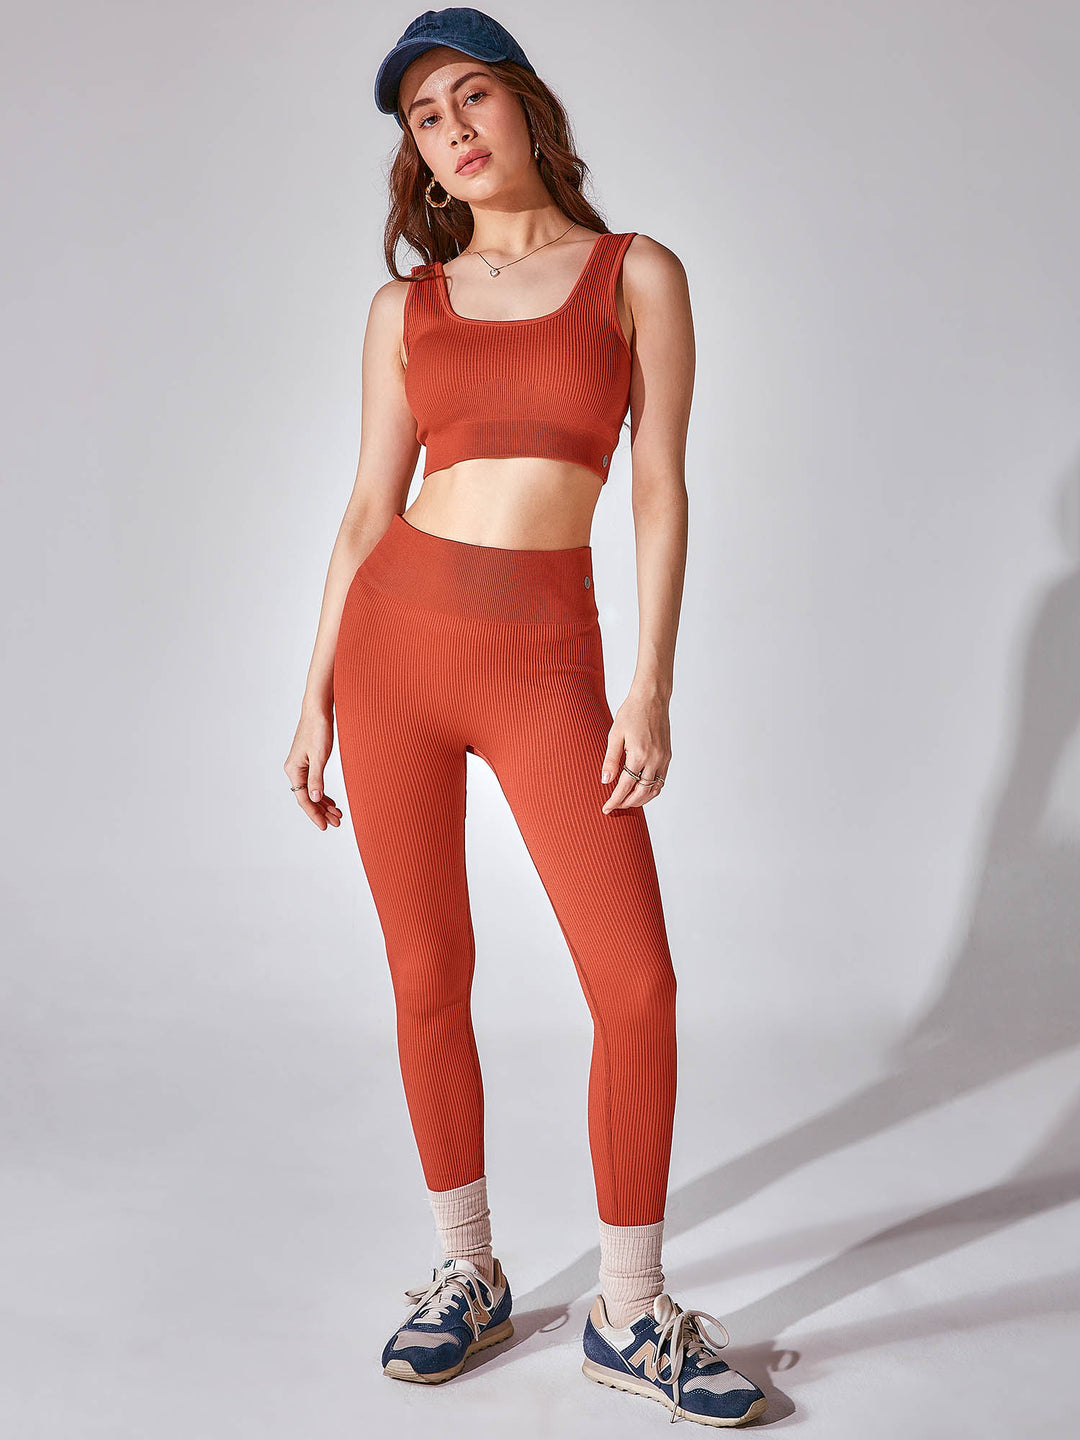 Gym Leggings and Top Sets - Shop Co Ords